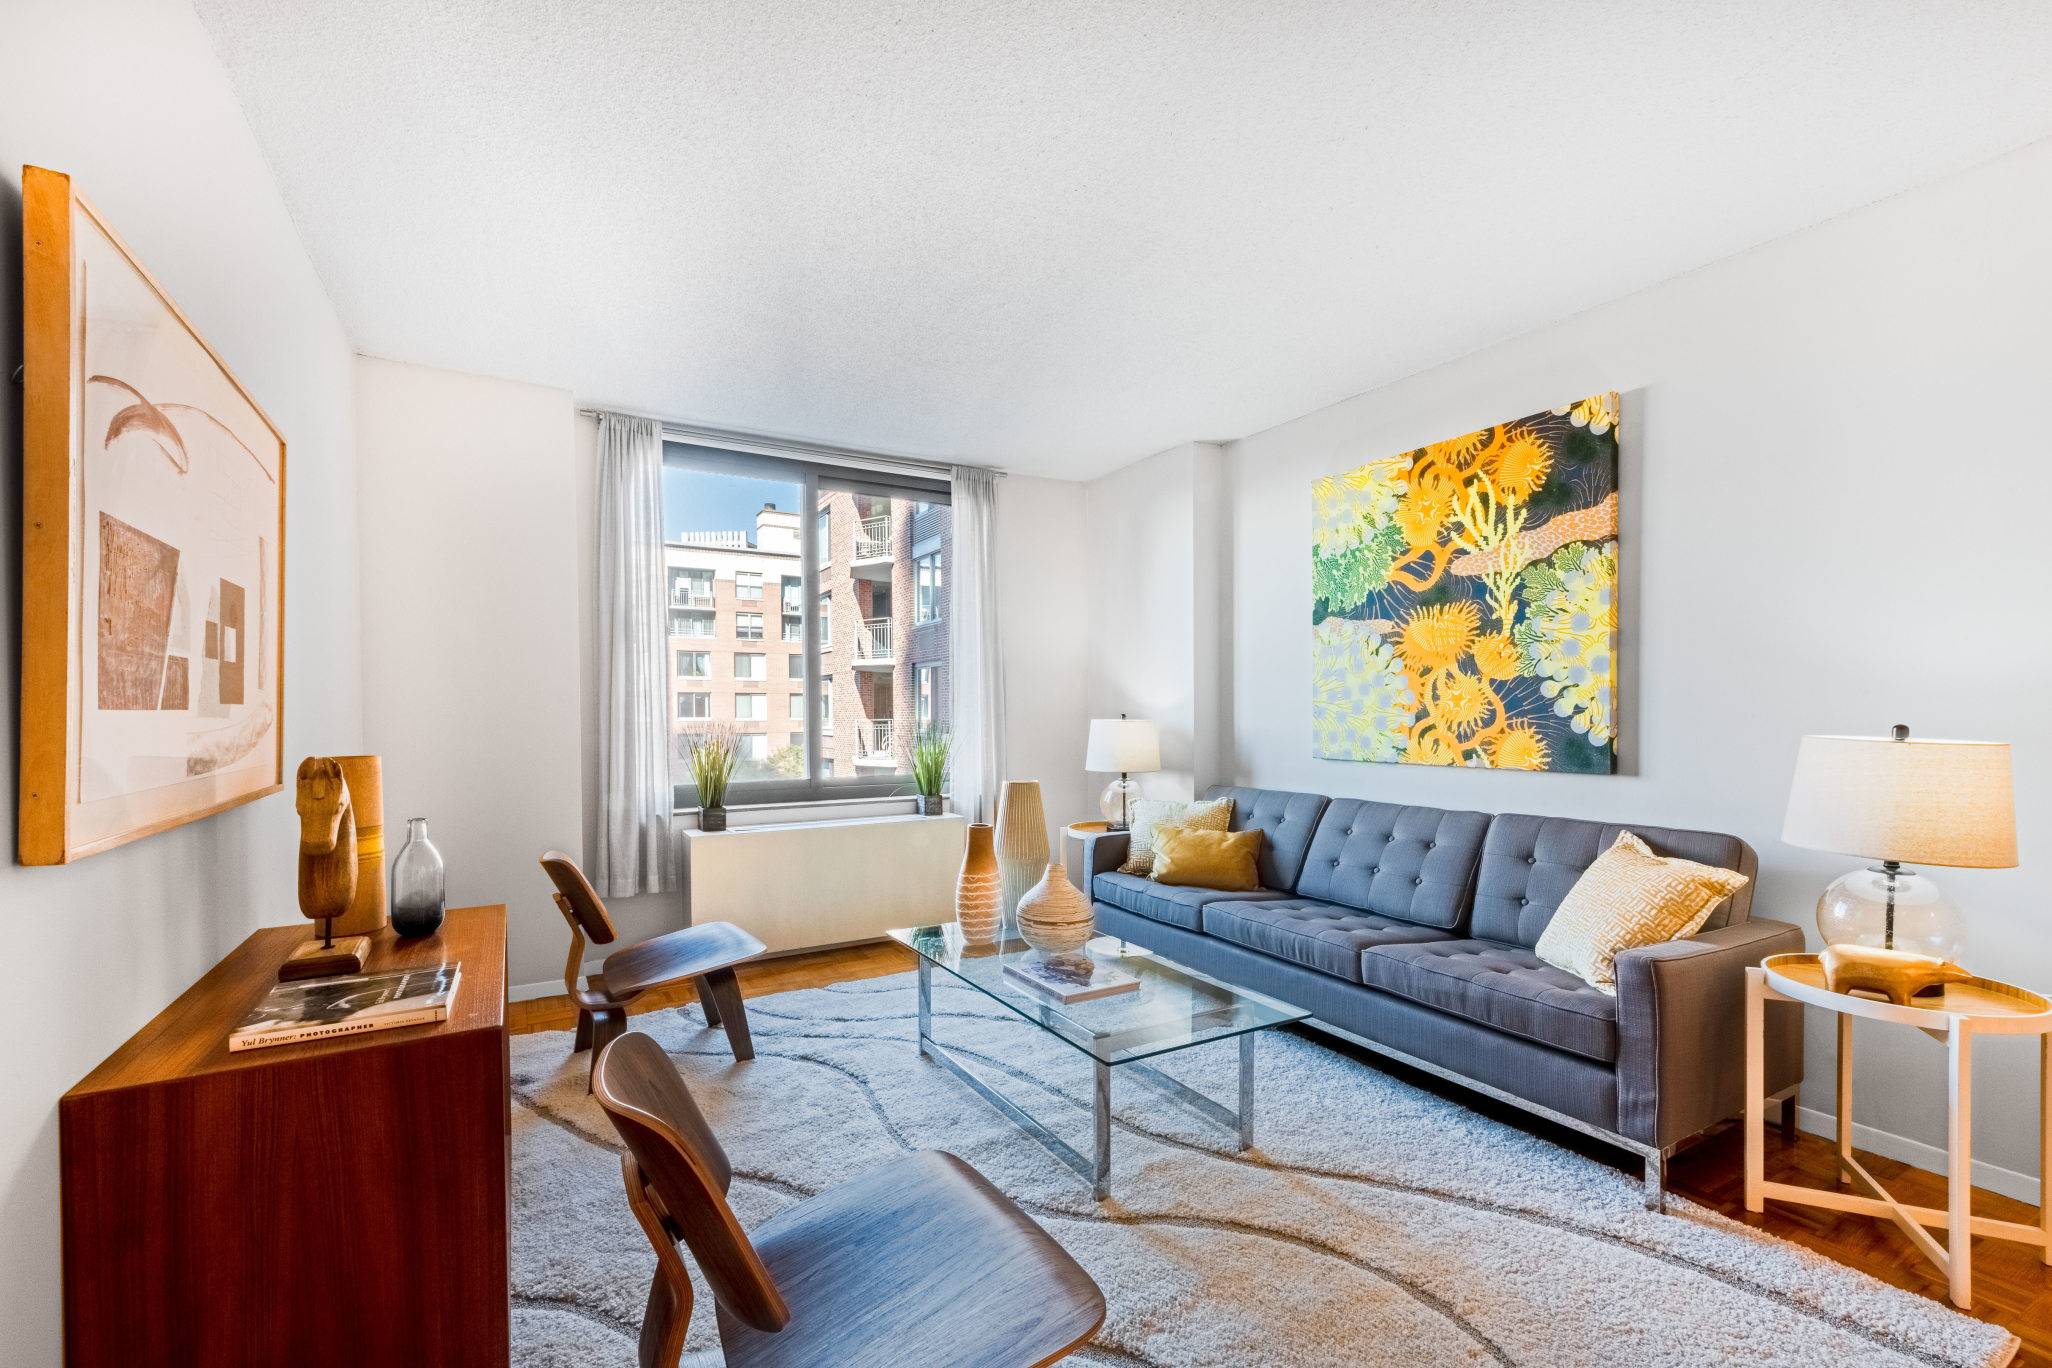 With open views of the Hudson River to the West, this freshly renovated, generously sized one bedroom apartment is superb.